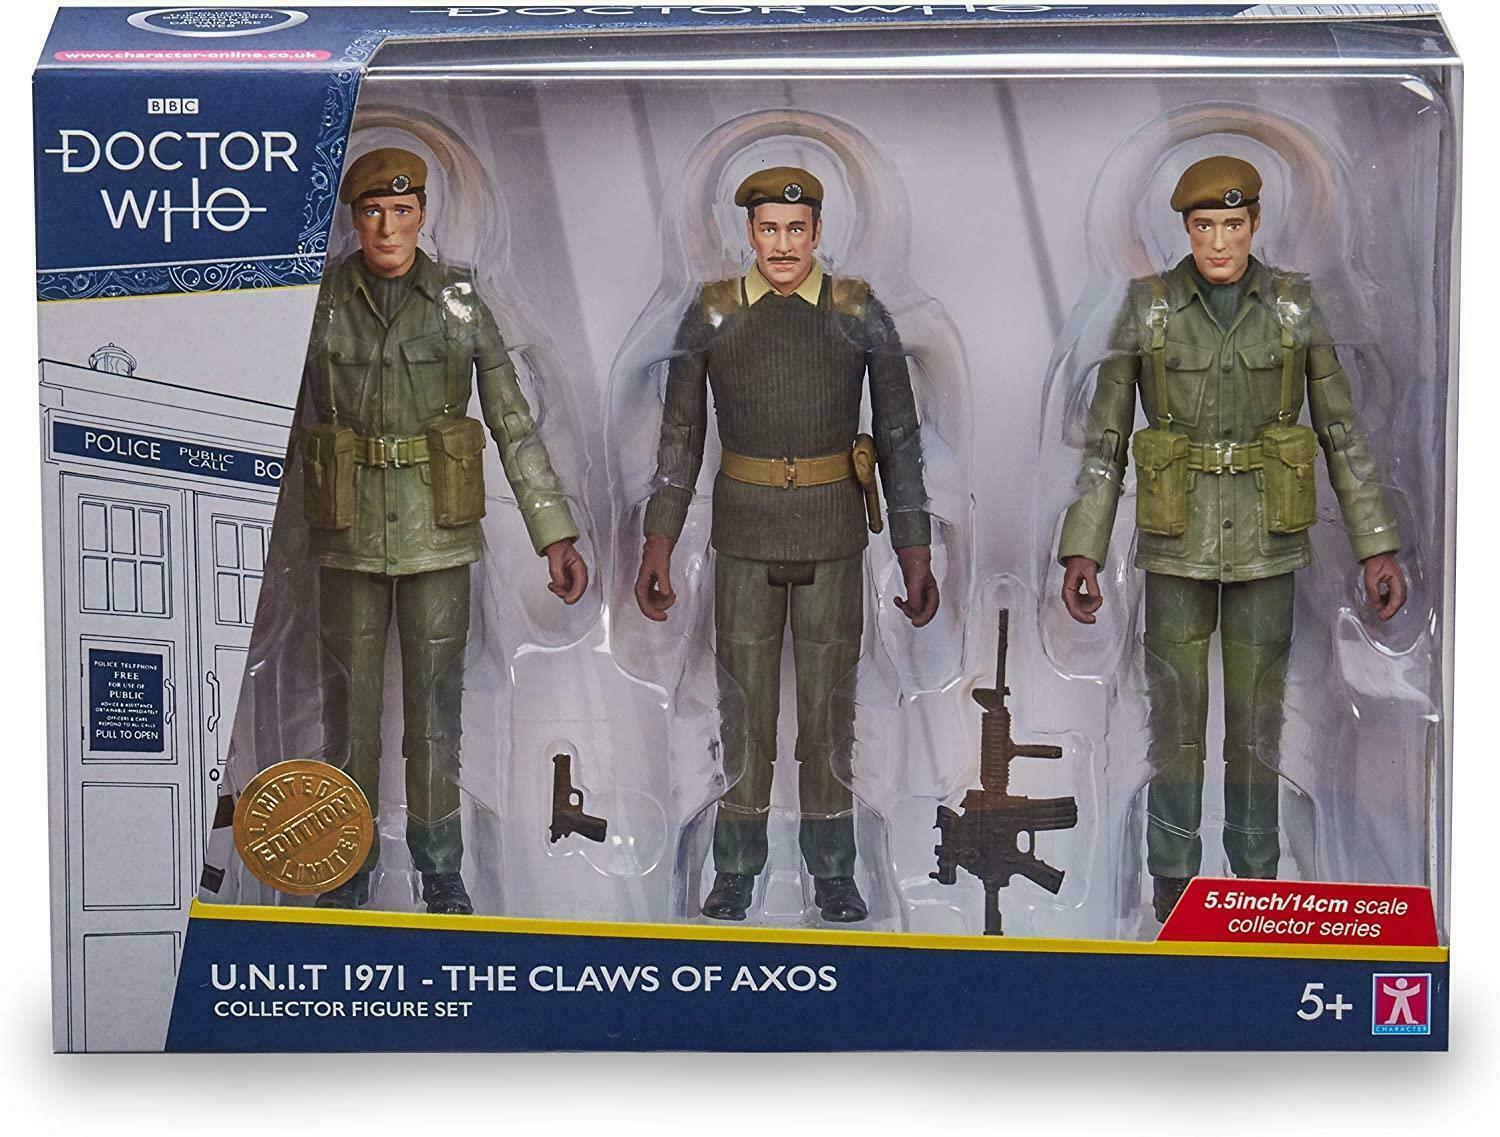 Doctor Who U.N.I.T Action Figures 1971 The Claws Of Axos Collectors Set